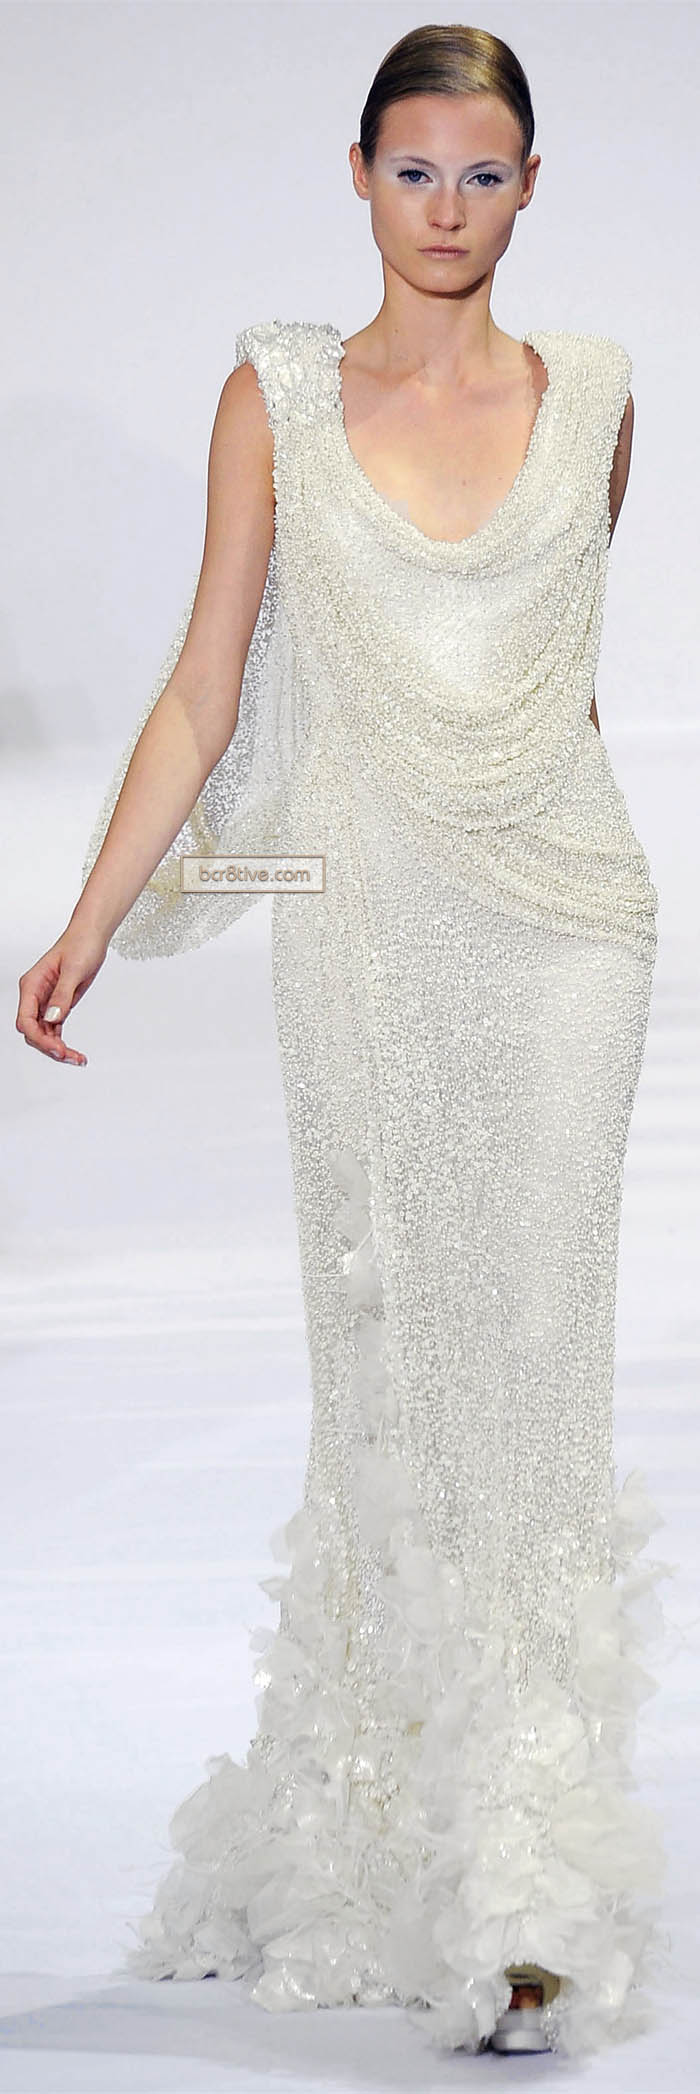 Elie Saab Haute Couture Fall Winter 2009